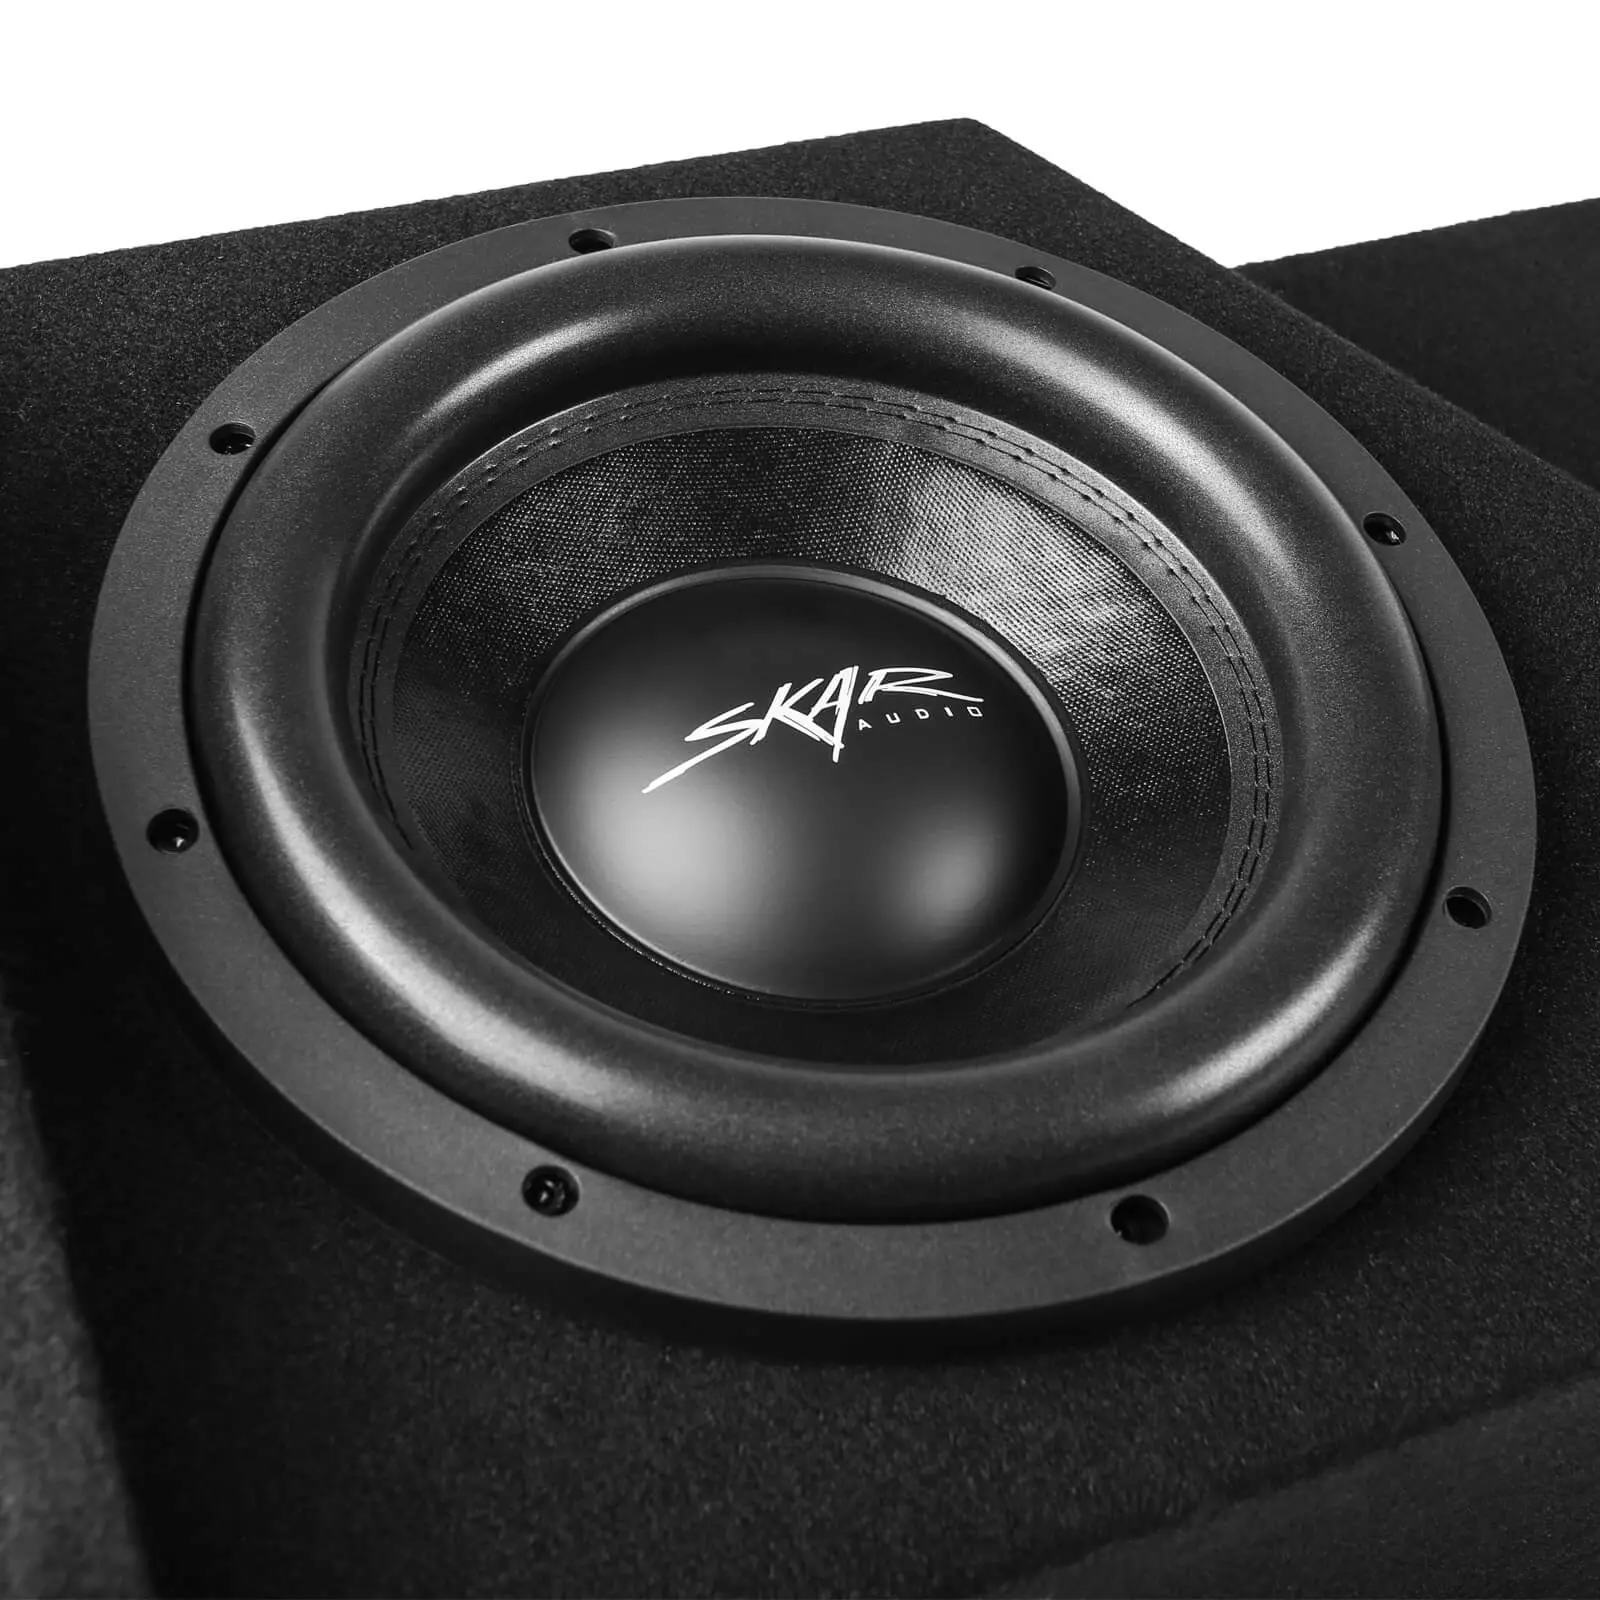 Dual 10" 1,600W Max Power Loaded Subwoofer Enclosure Compatible with 2014-2018 Chevy Silverado & GMC Sierra Double Cab Trucks #6